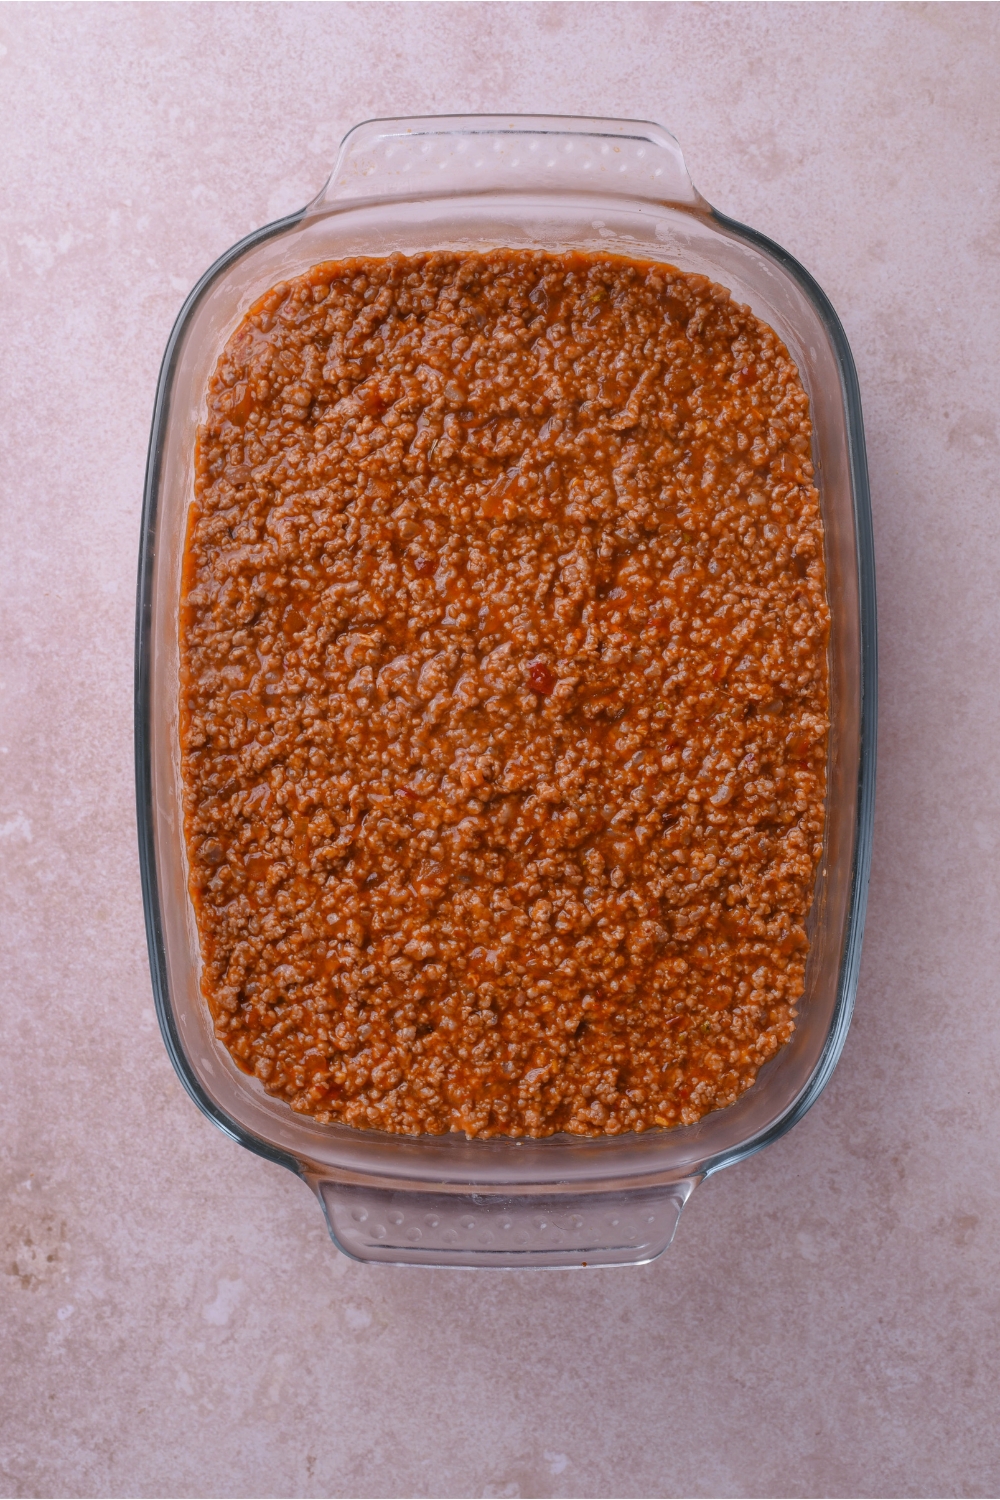 A clear baking dish filled with cooked ground beef in red sauce spread into an even layer.